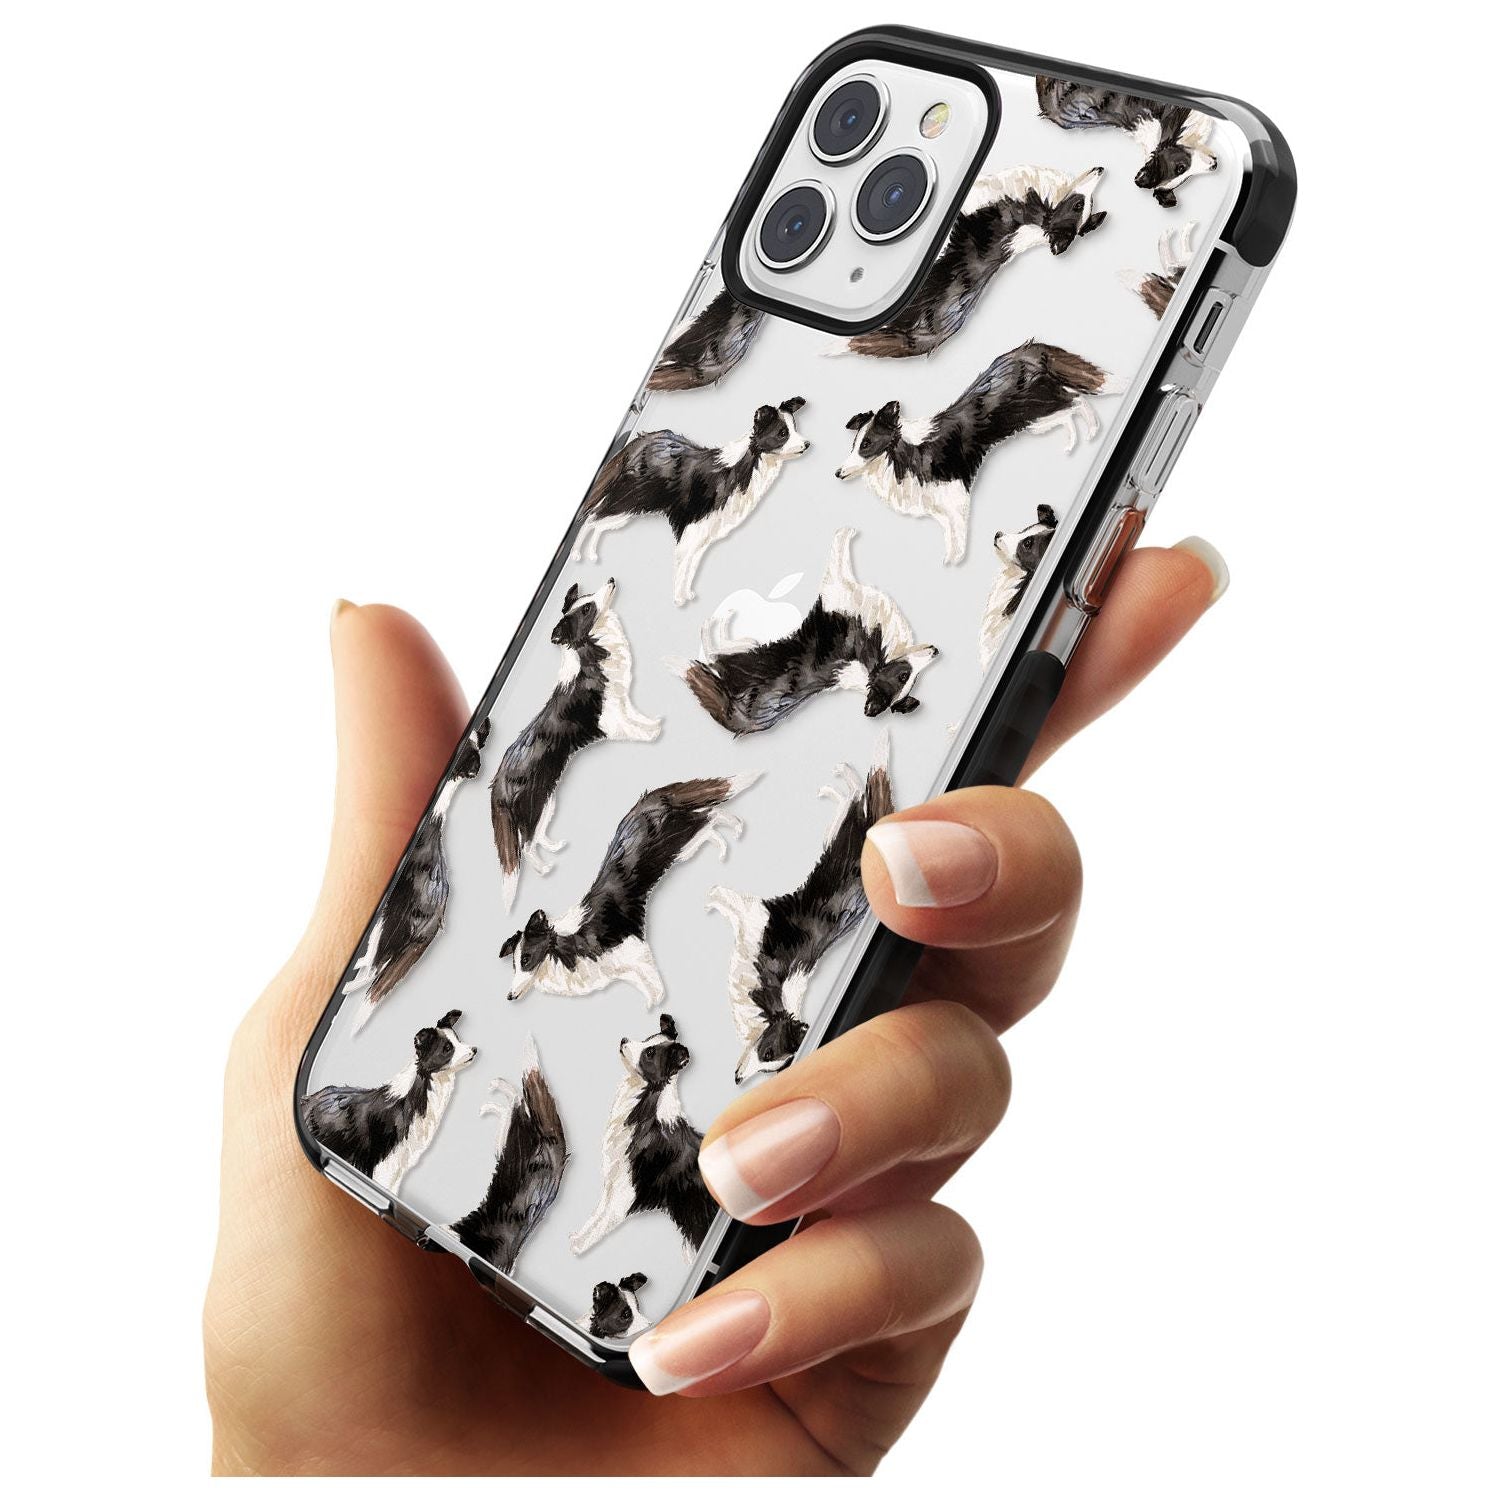 Border Collie Watercolour Dog Pattern Black Impact Phone Case for iPhone 11 Pro Max